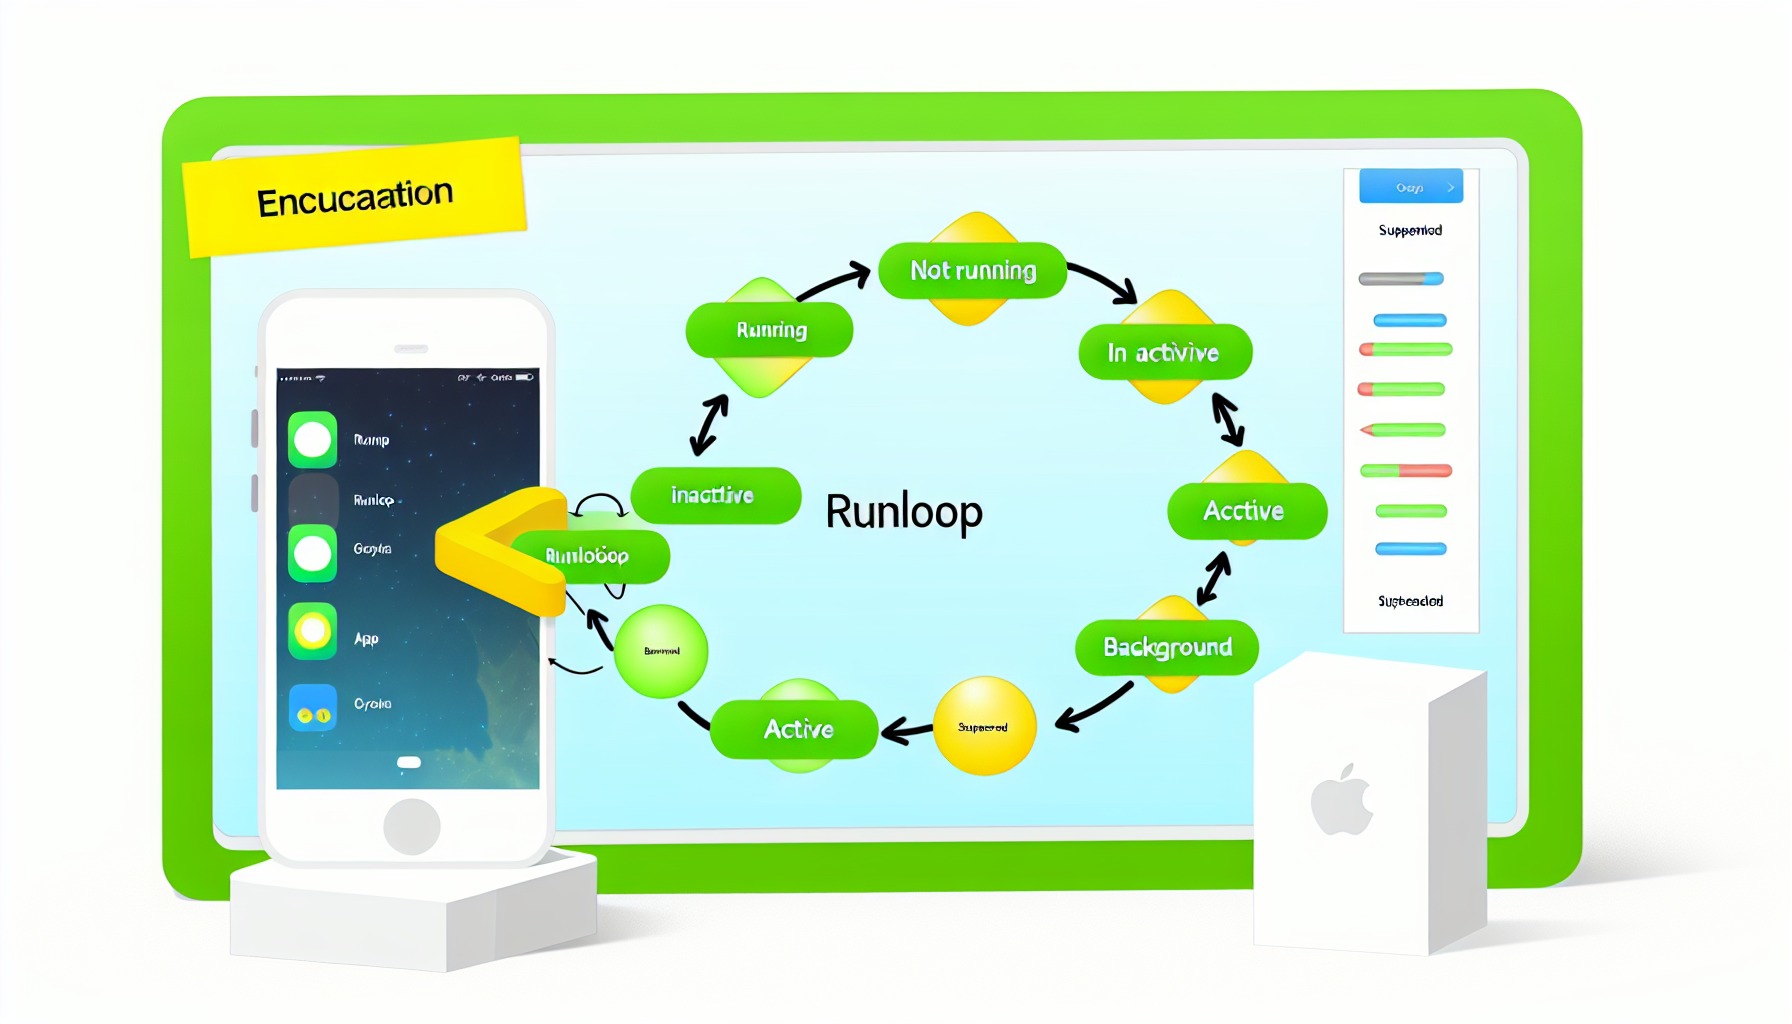 Illustration of RunLoop in action within an iOS app lifecycle